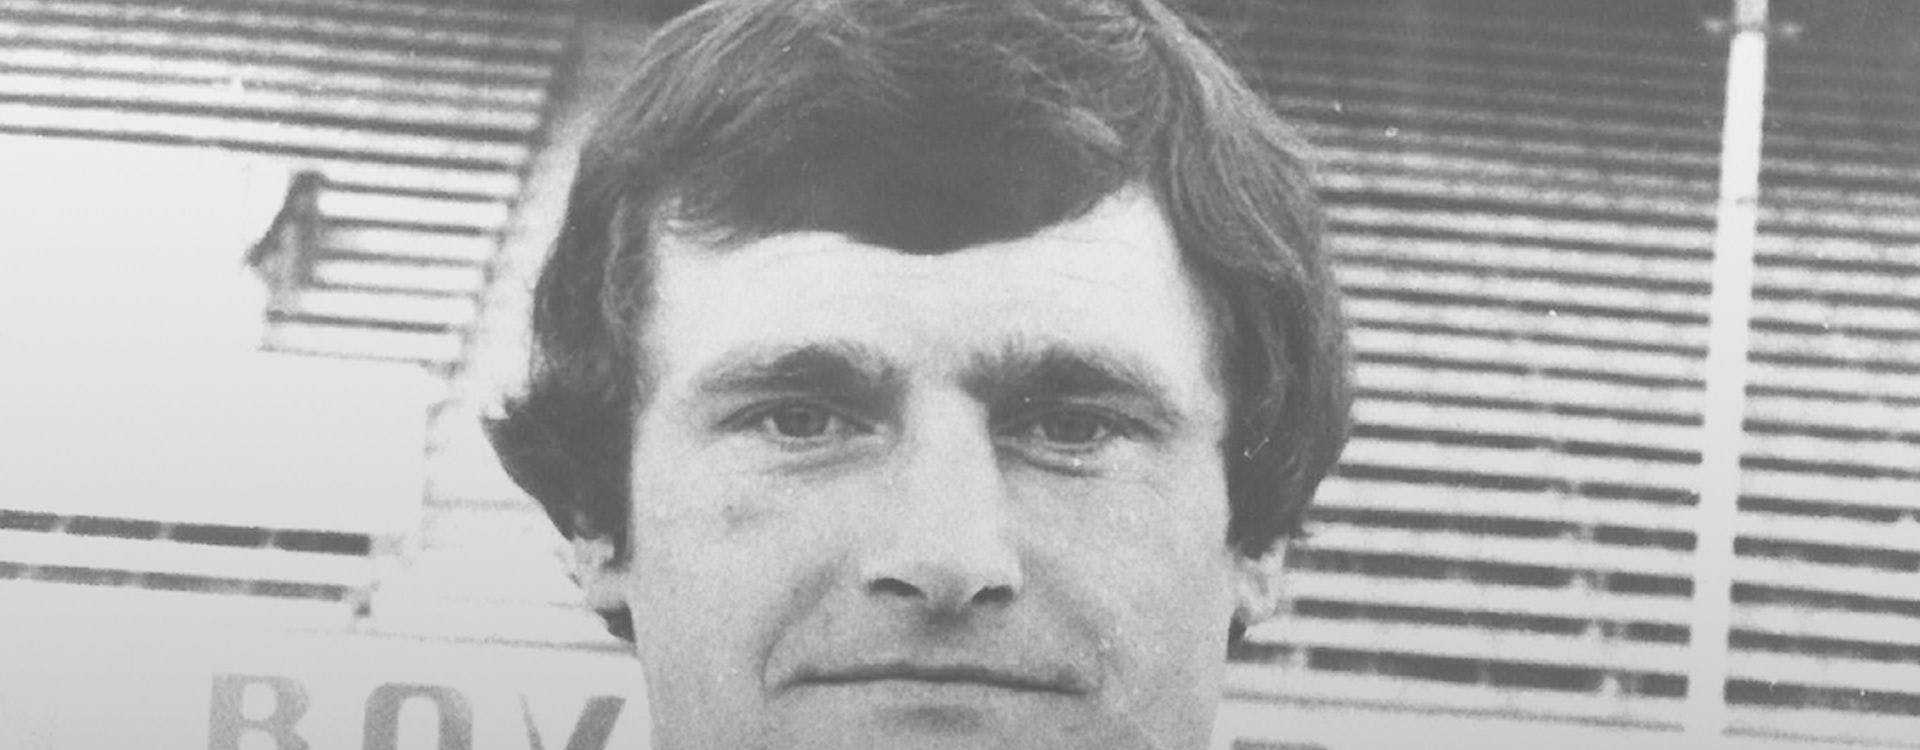 Hull KR are deeply saddened to announce one of our greatest Robins, Phil Lowe has passed away at the age of 74.